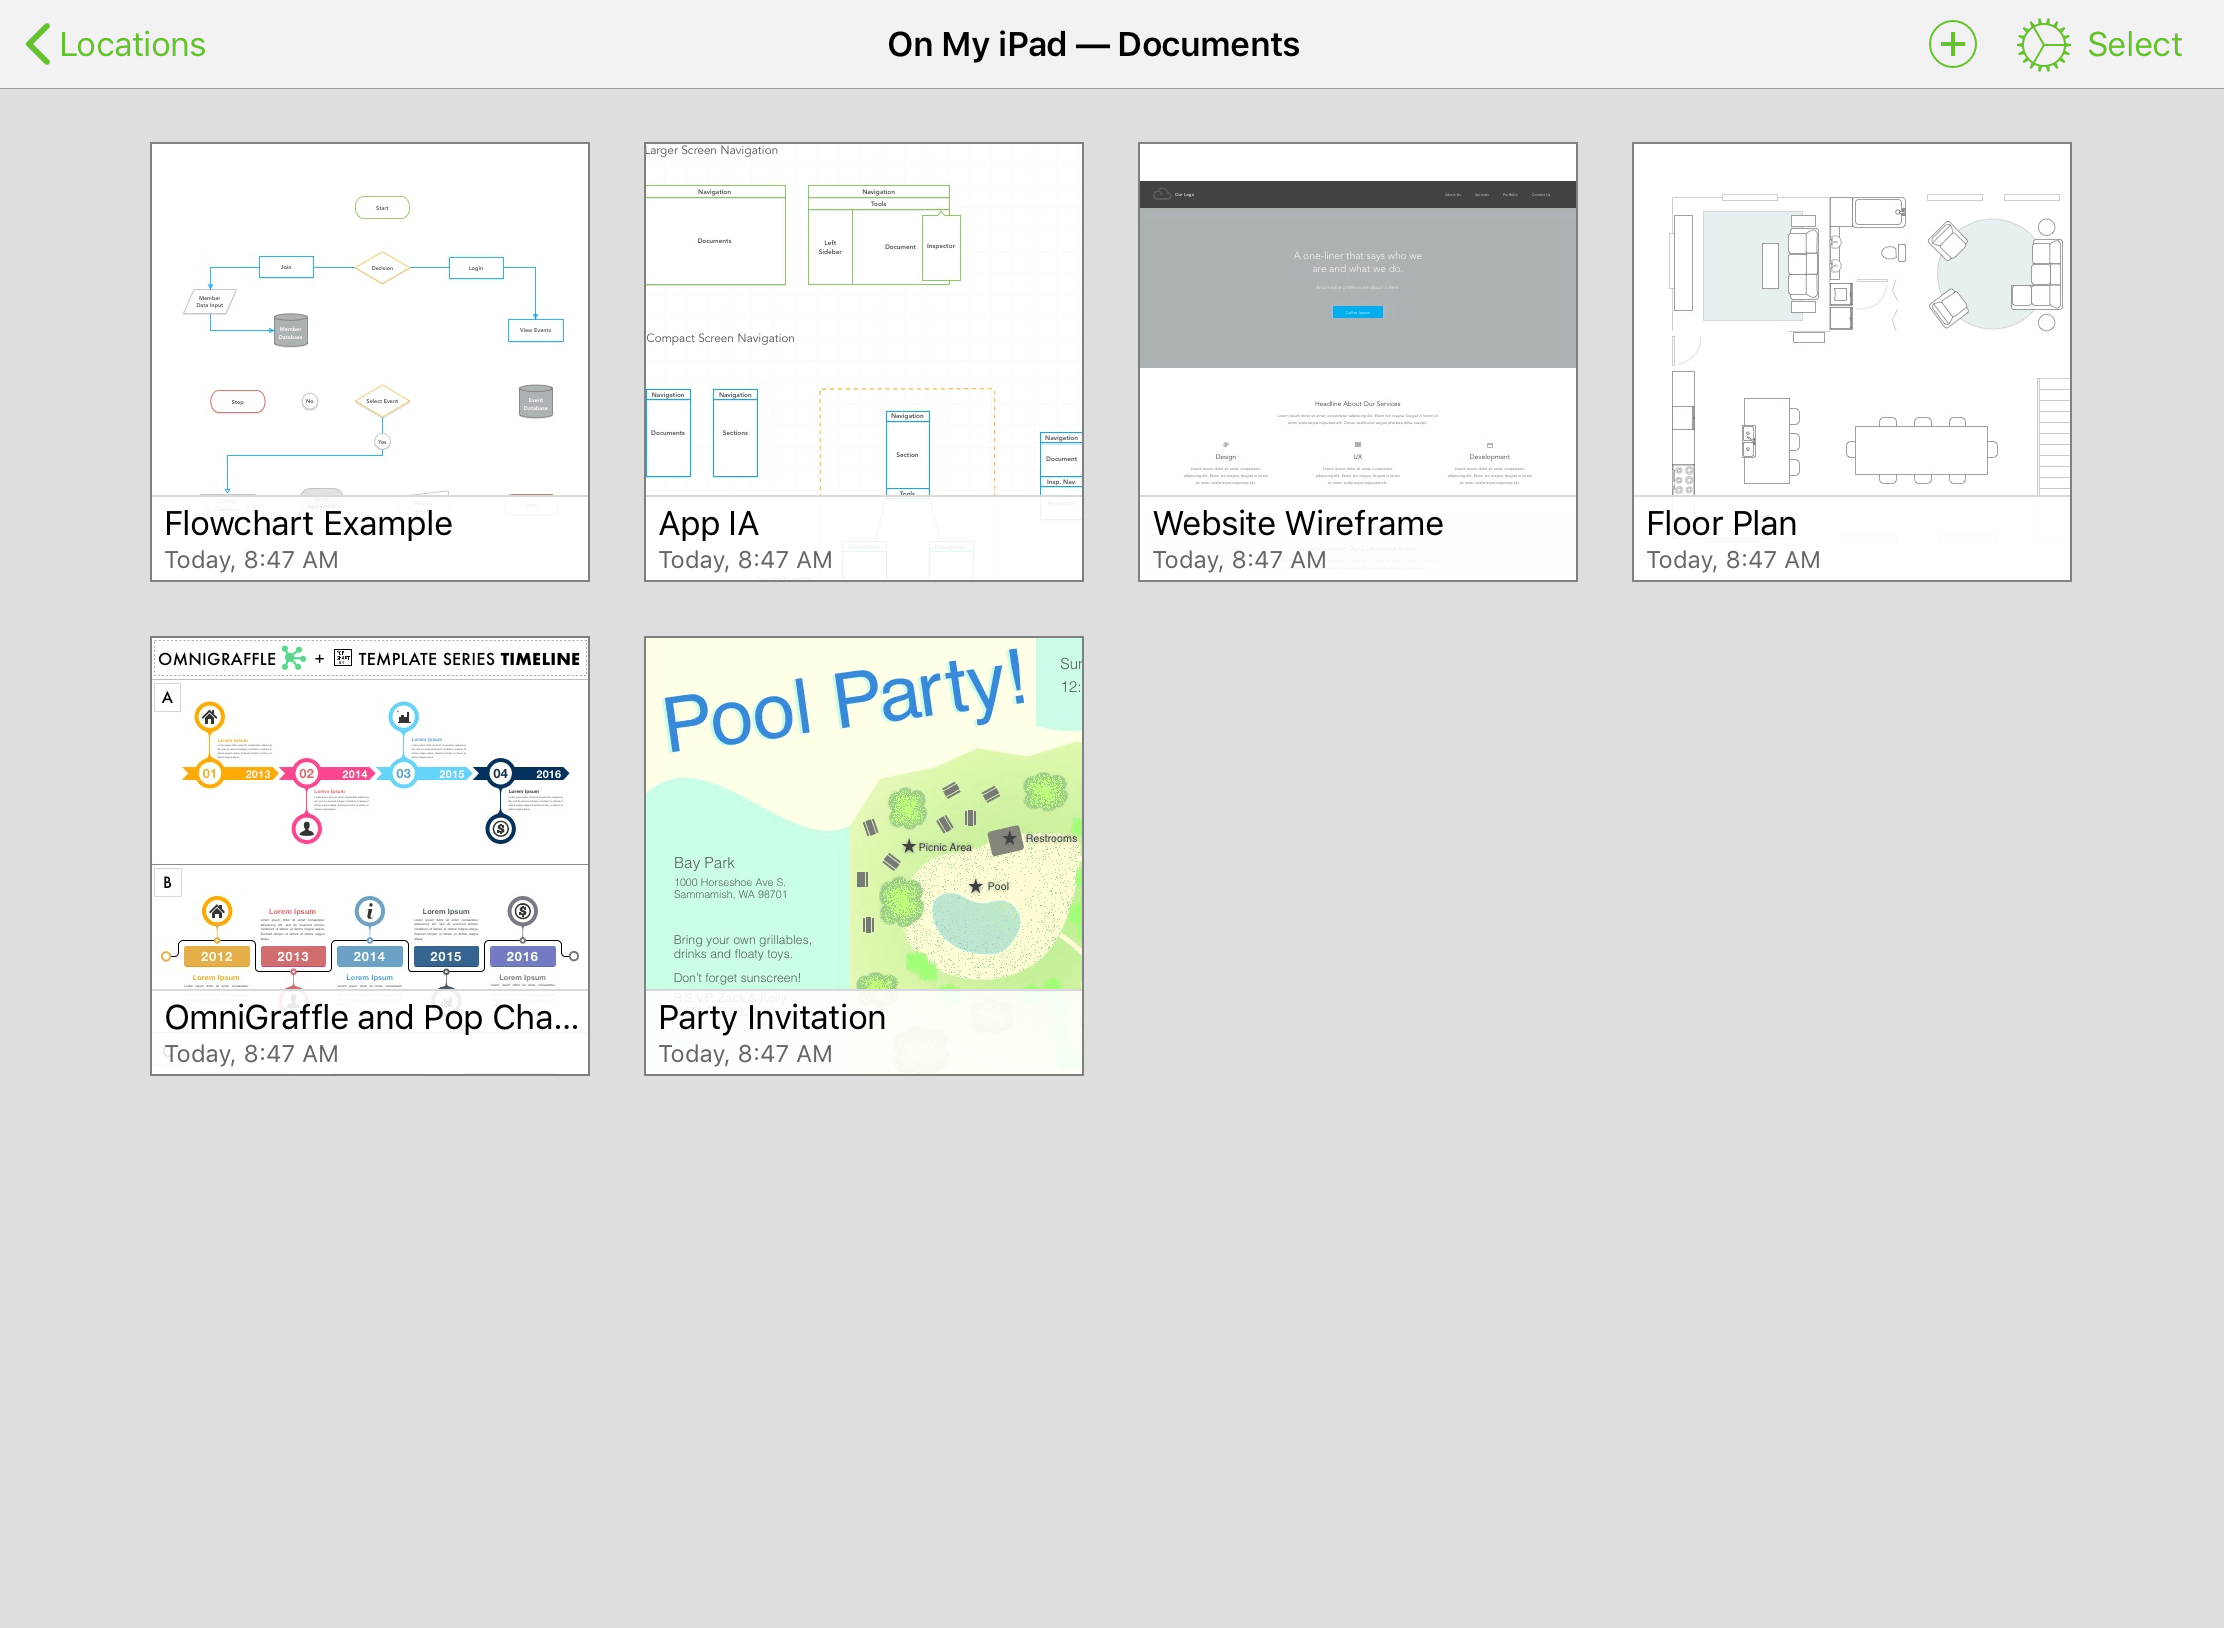 The On My [device] folder, as viewed in the Document Browser